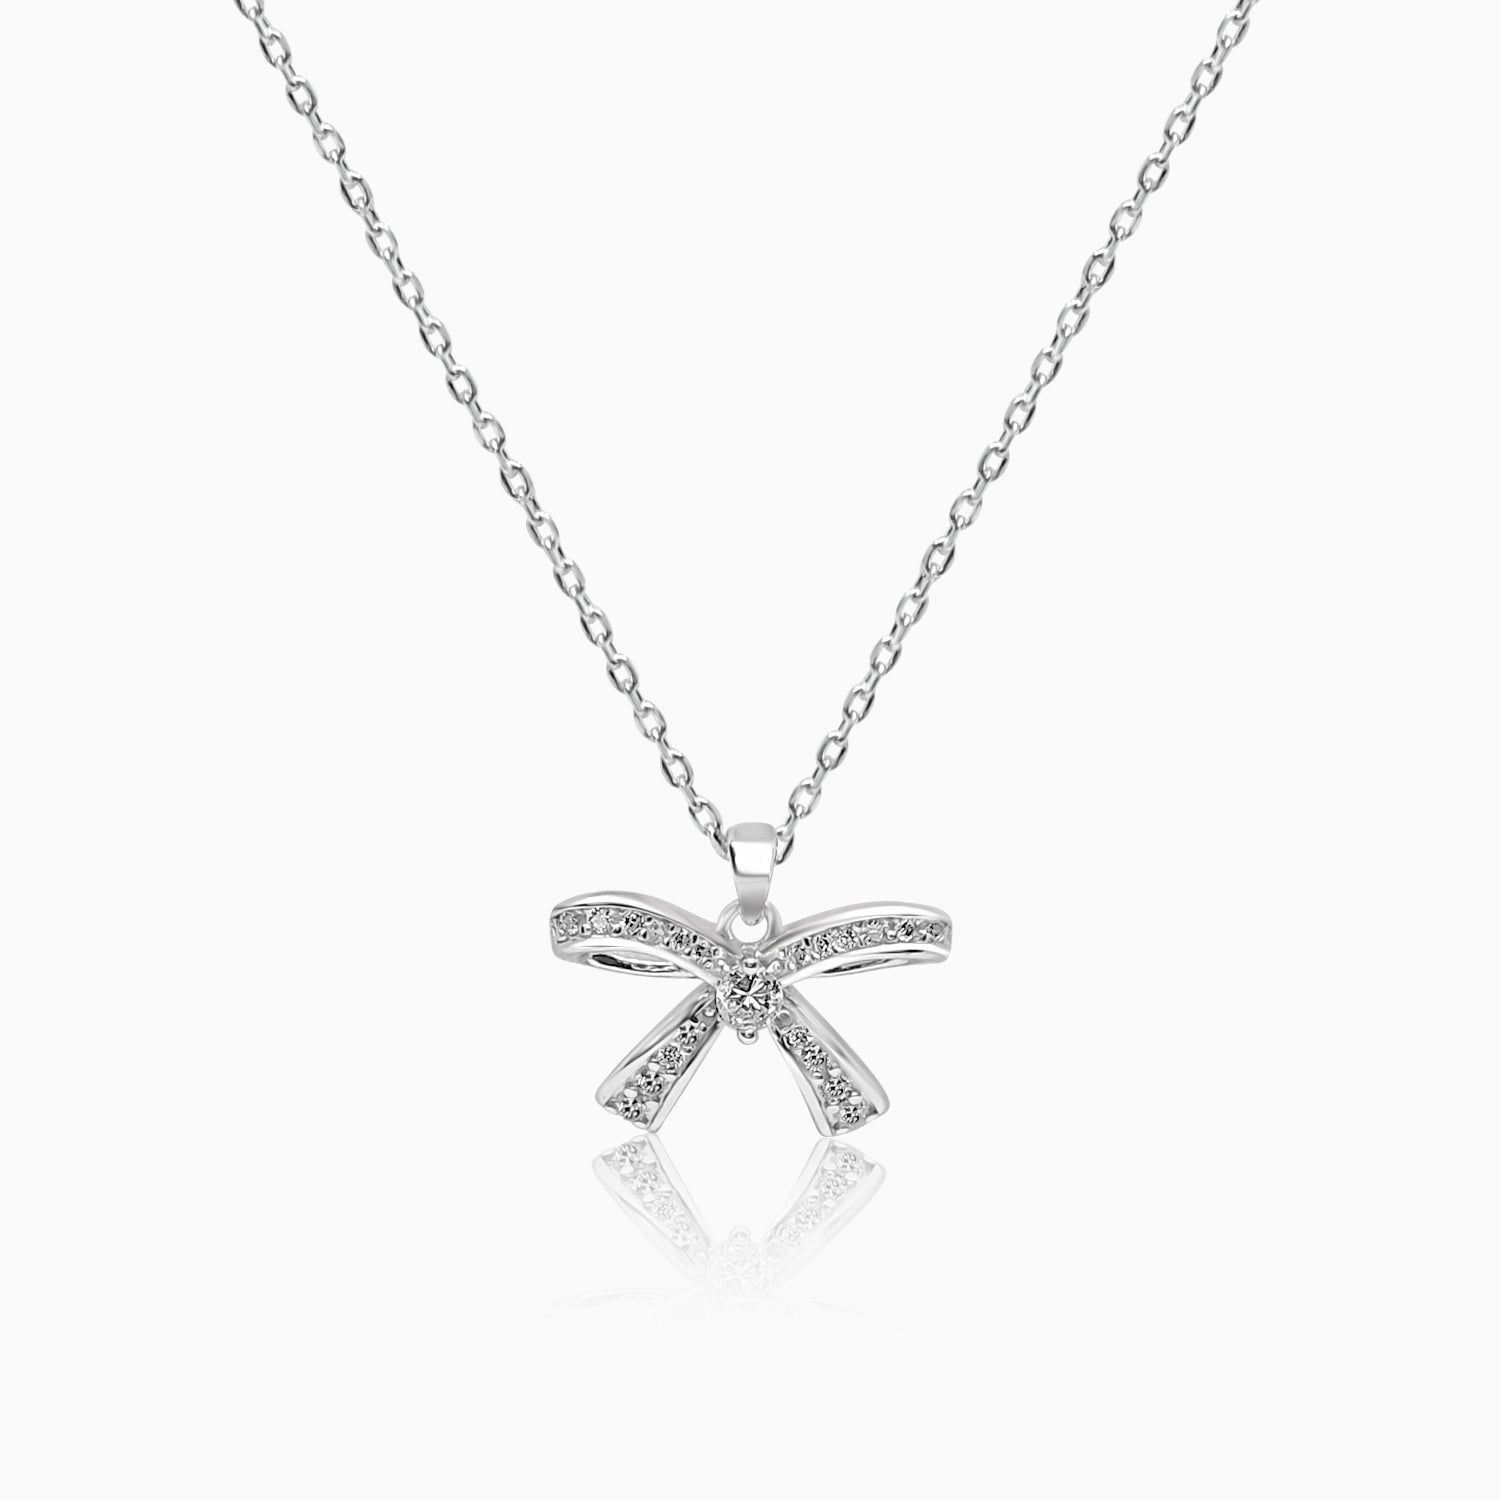 Silver Sparkling Bow Necklace